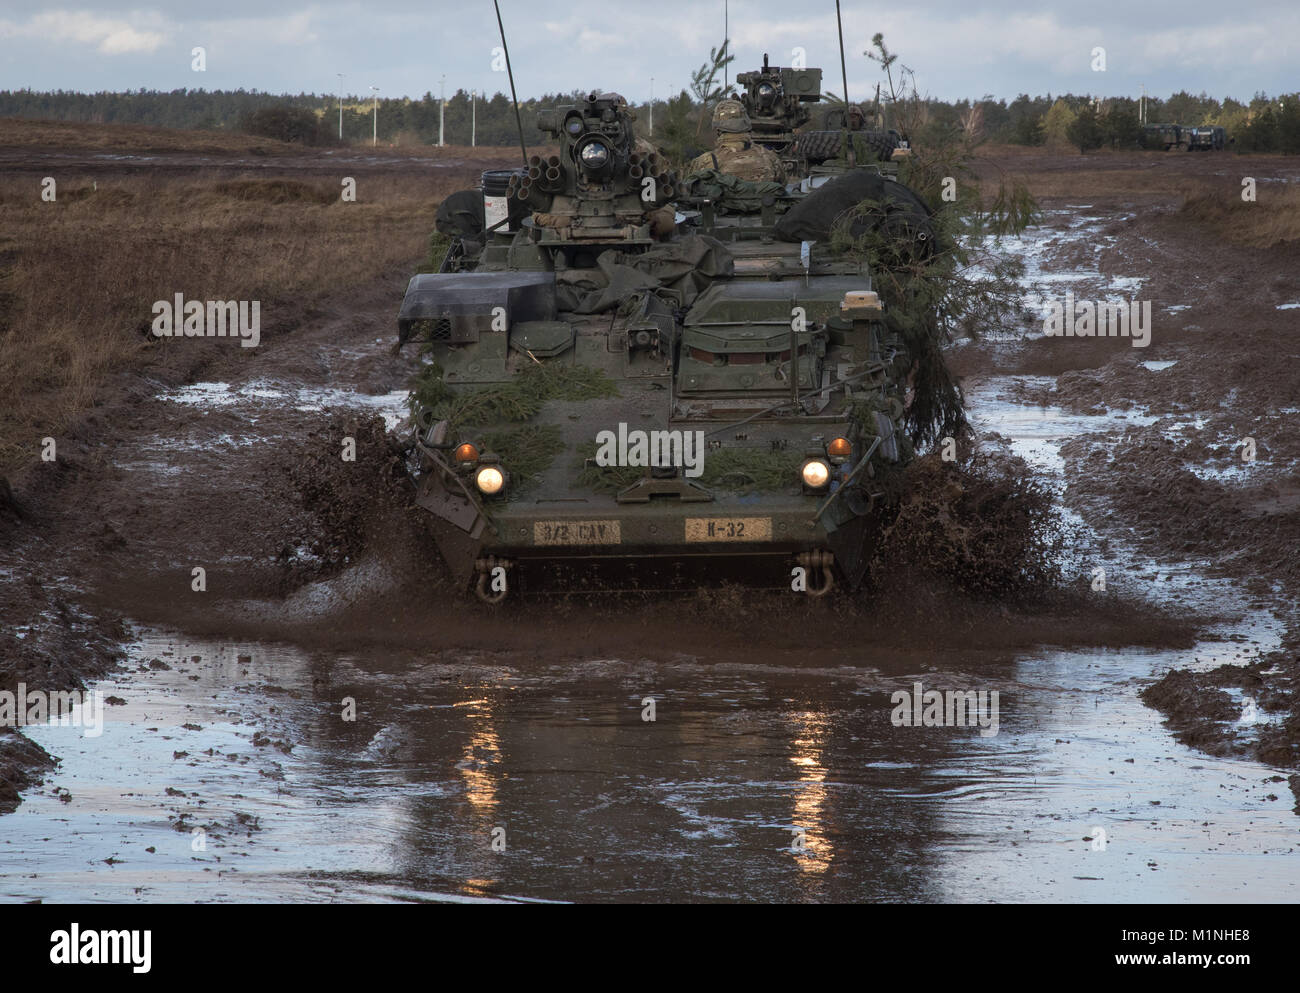 U.S. Soldiers from Kronos Troop, 3rd Squadron, 2nd Cavalry Regiment, drive their Strykers to their battle positions as they participate in a mounted NATO live fire exercise coordinated by the Polish 1st Battalion 15th Mechanized Brigade at a range near the Bemowo Piskie Training Area, Poland, Jan. 30, 2018. The unique, multinational battle group, comprised of U.S., U.K., Croatian and Romanian soldiers serve with the Polish 15th Mechanized Brigade as a deterrence force in northeast Poland in support of NATO’s Enhanced Forward Presence. (U.S. Army photo by Spc. Andrew McNeil / 22nd Mobile Public Stock Photo